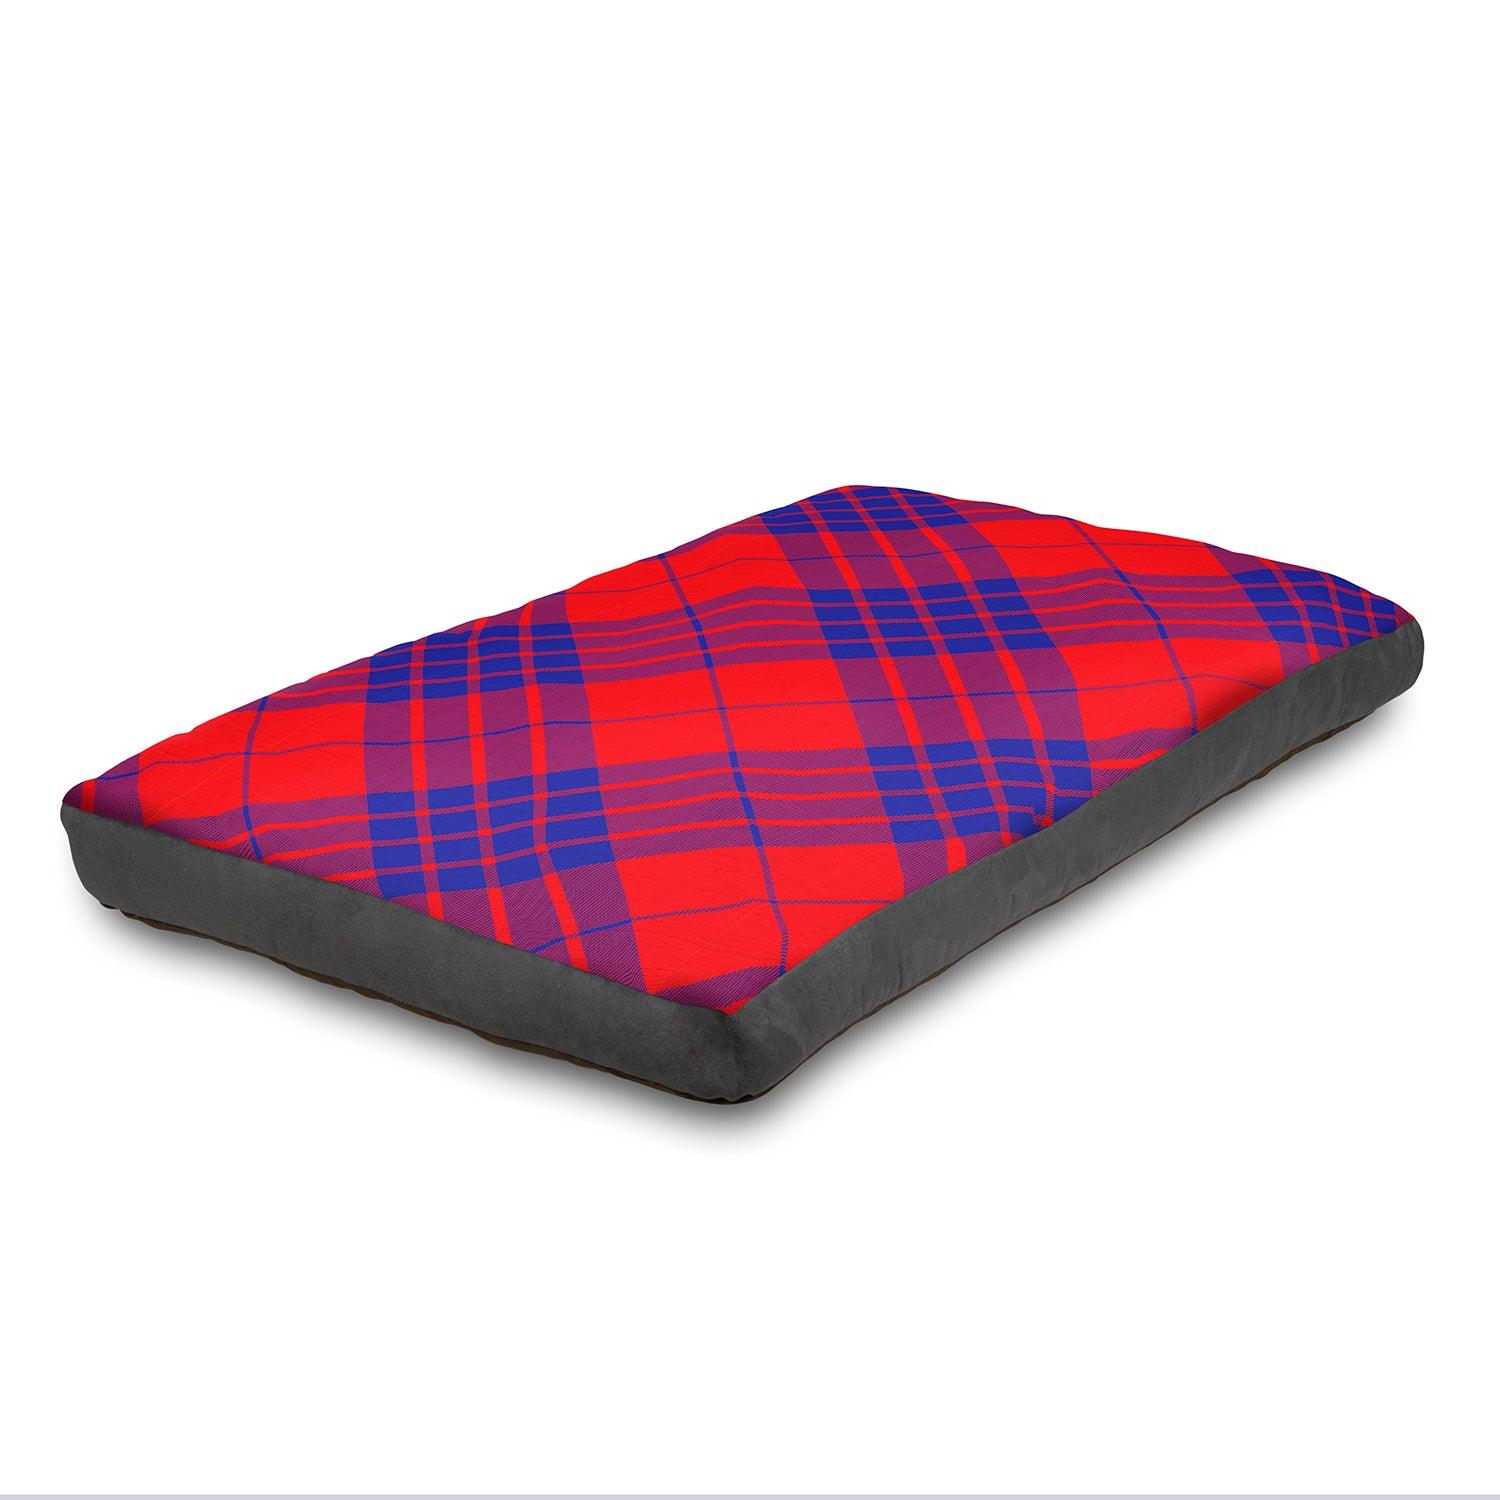 View Super Comfy Dog Bed Soft and Fluffy with Washable Cover Medium 100 cm x 65 cm Red information